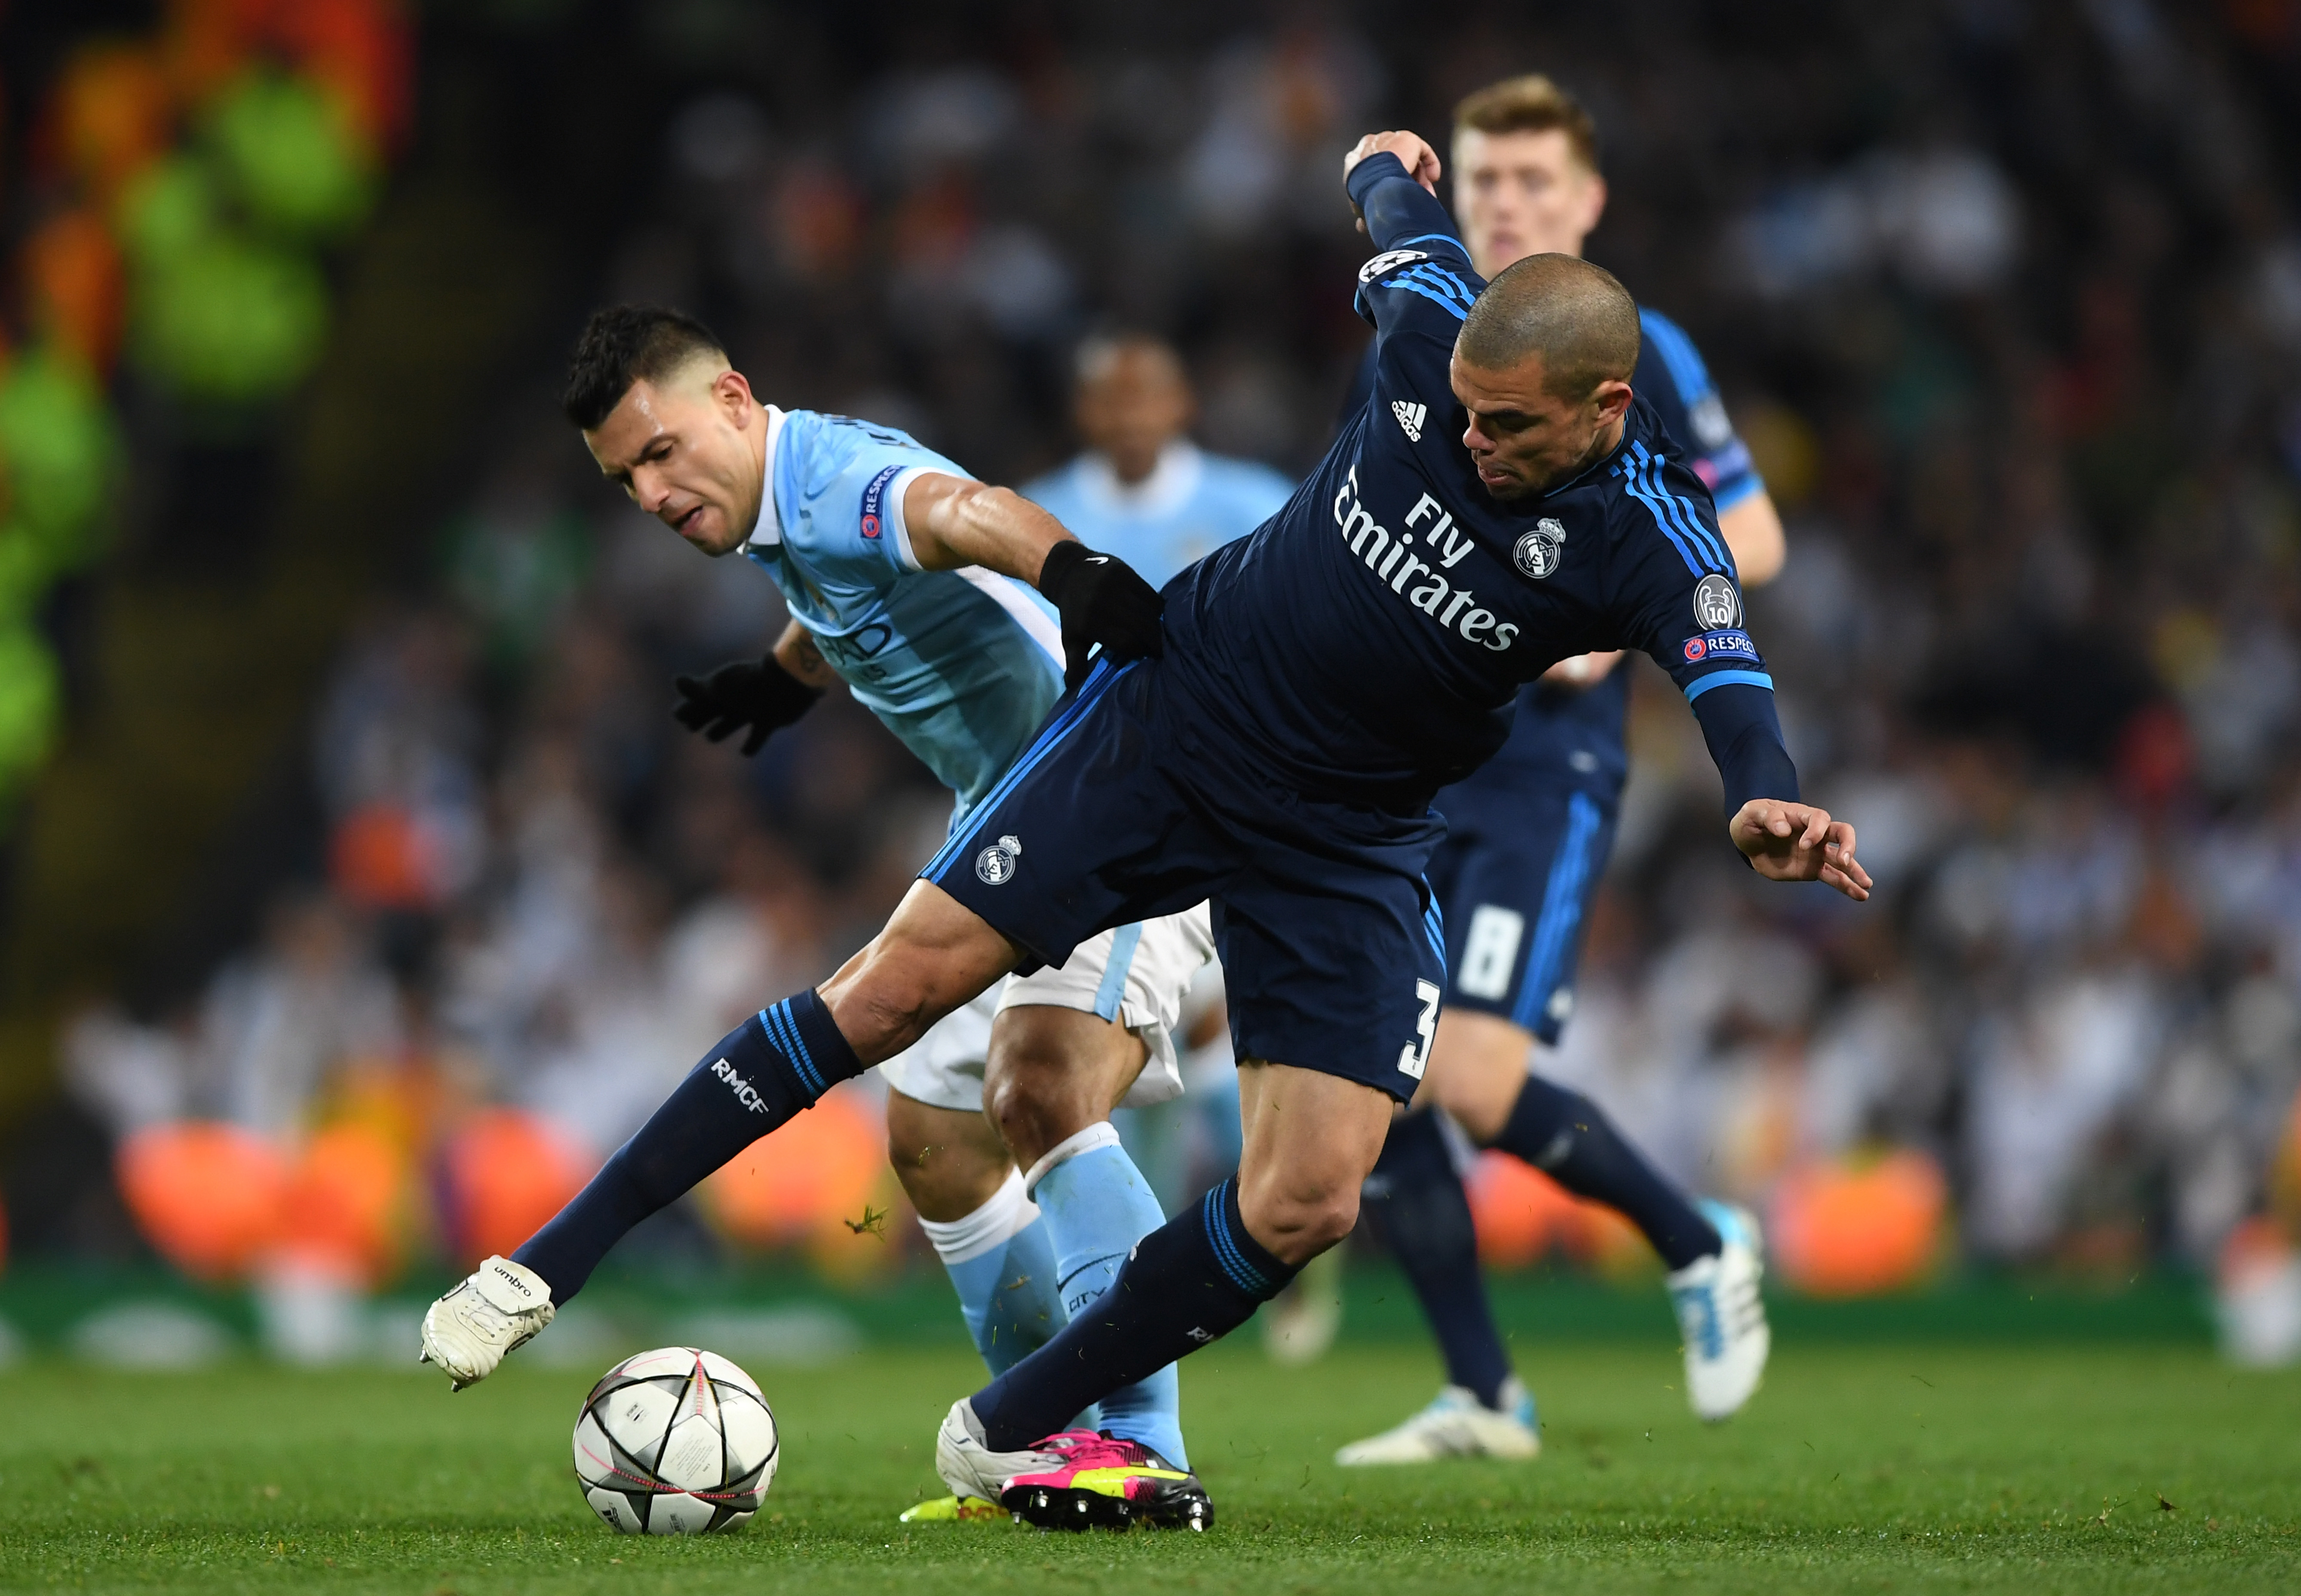 Real Madrid-Man City Free Live Stream How to Watch Online